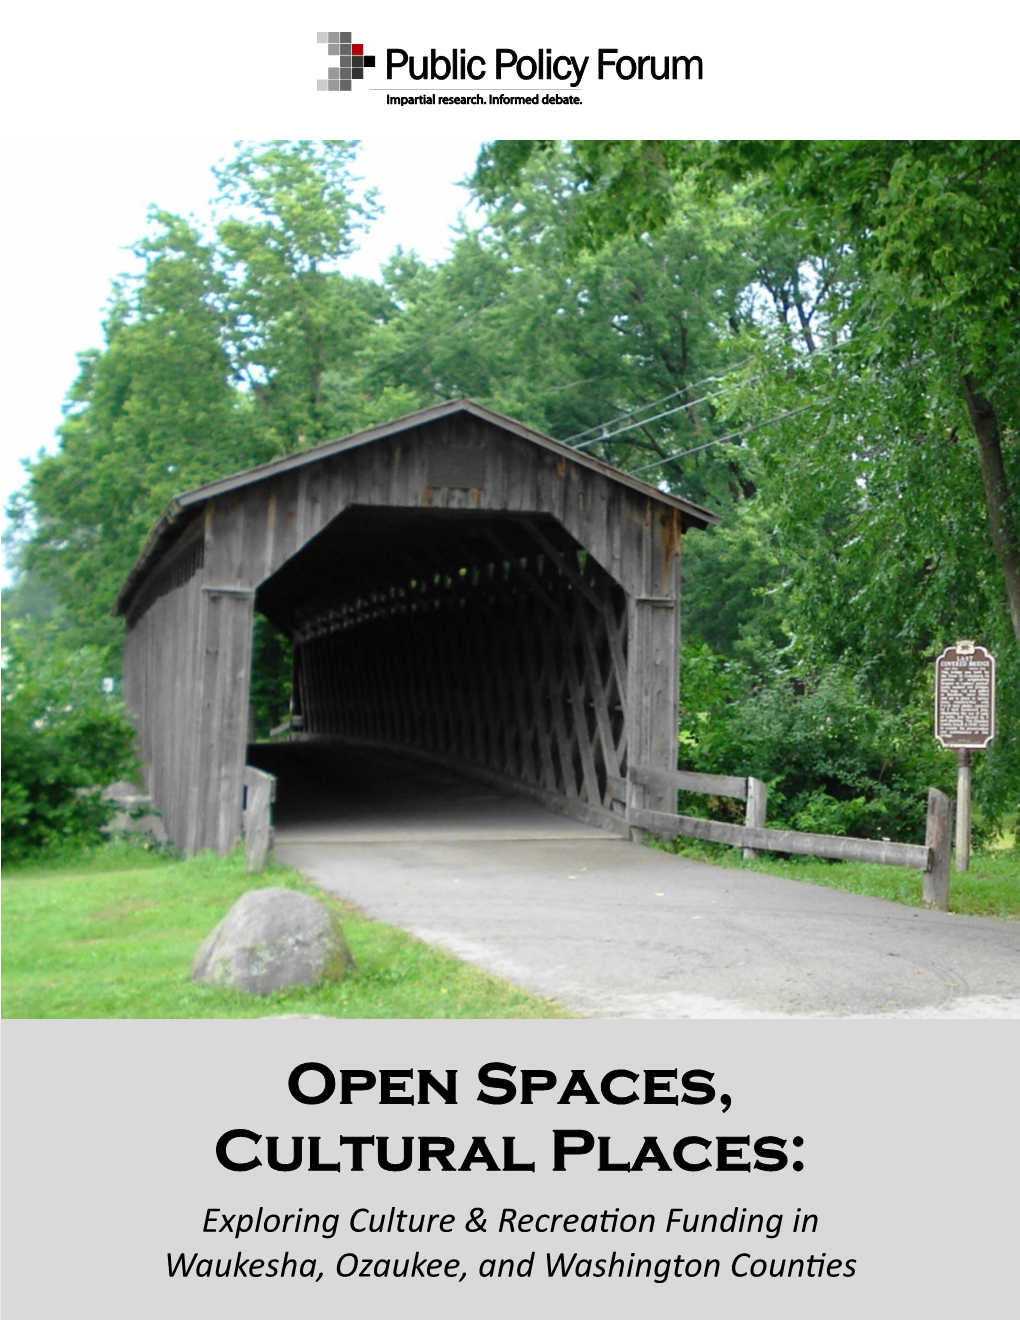 Open Spaces, Cultural Places: Exploring Culture & Recreation Funding in Waukesha, Ozaukee, and Washington Counties